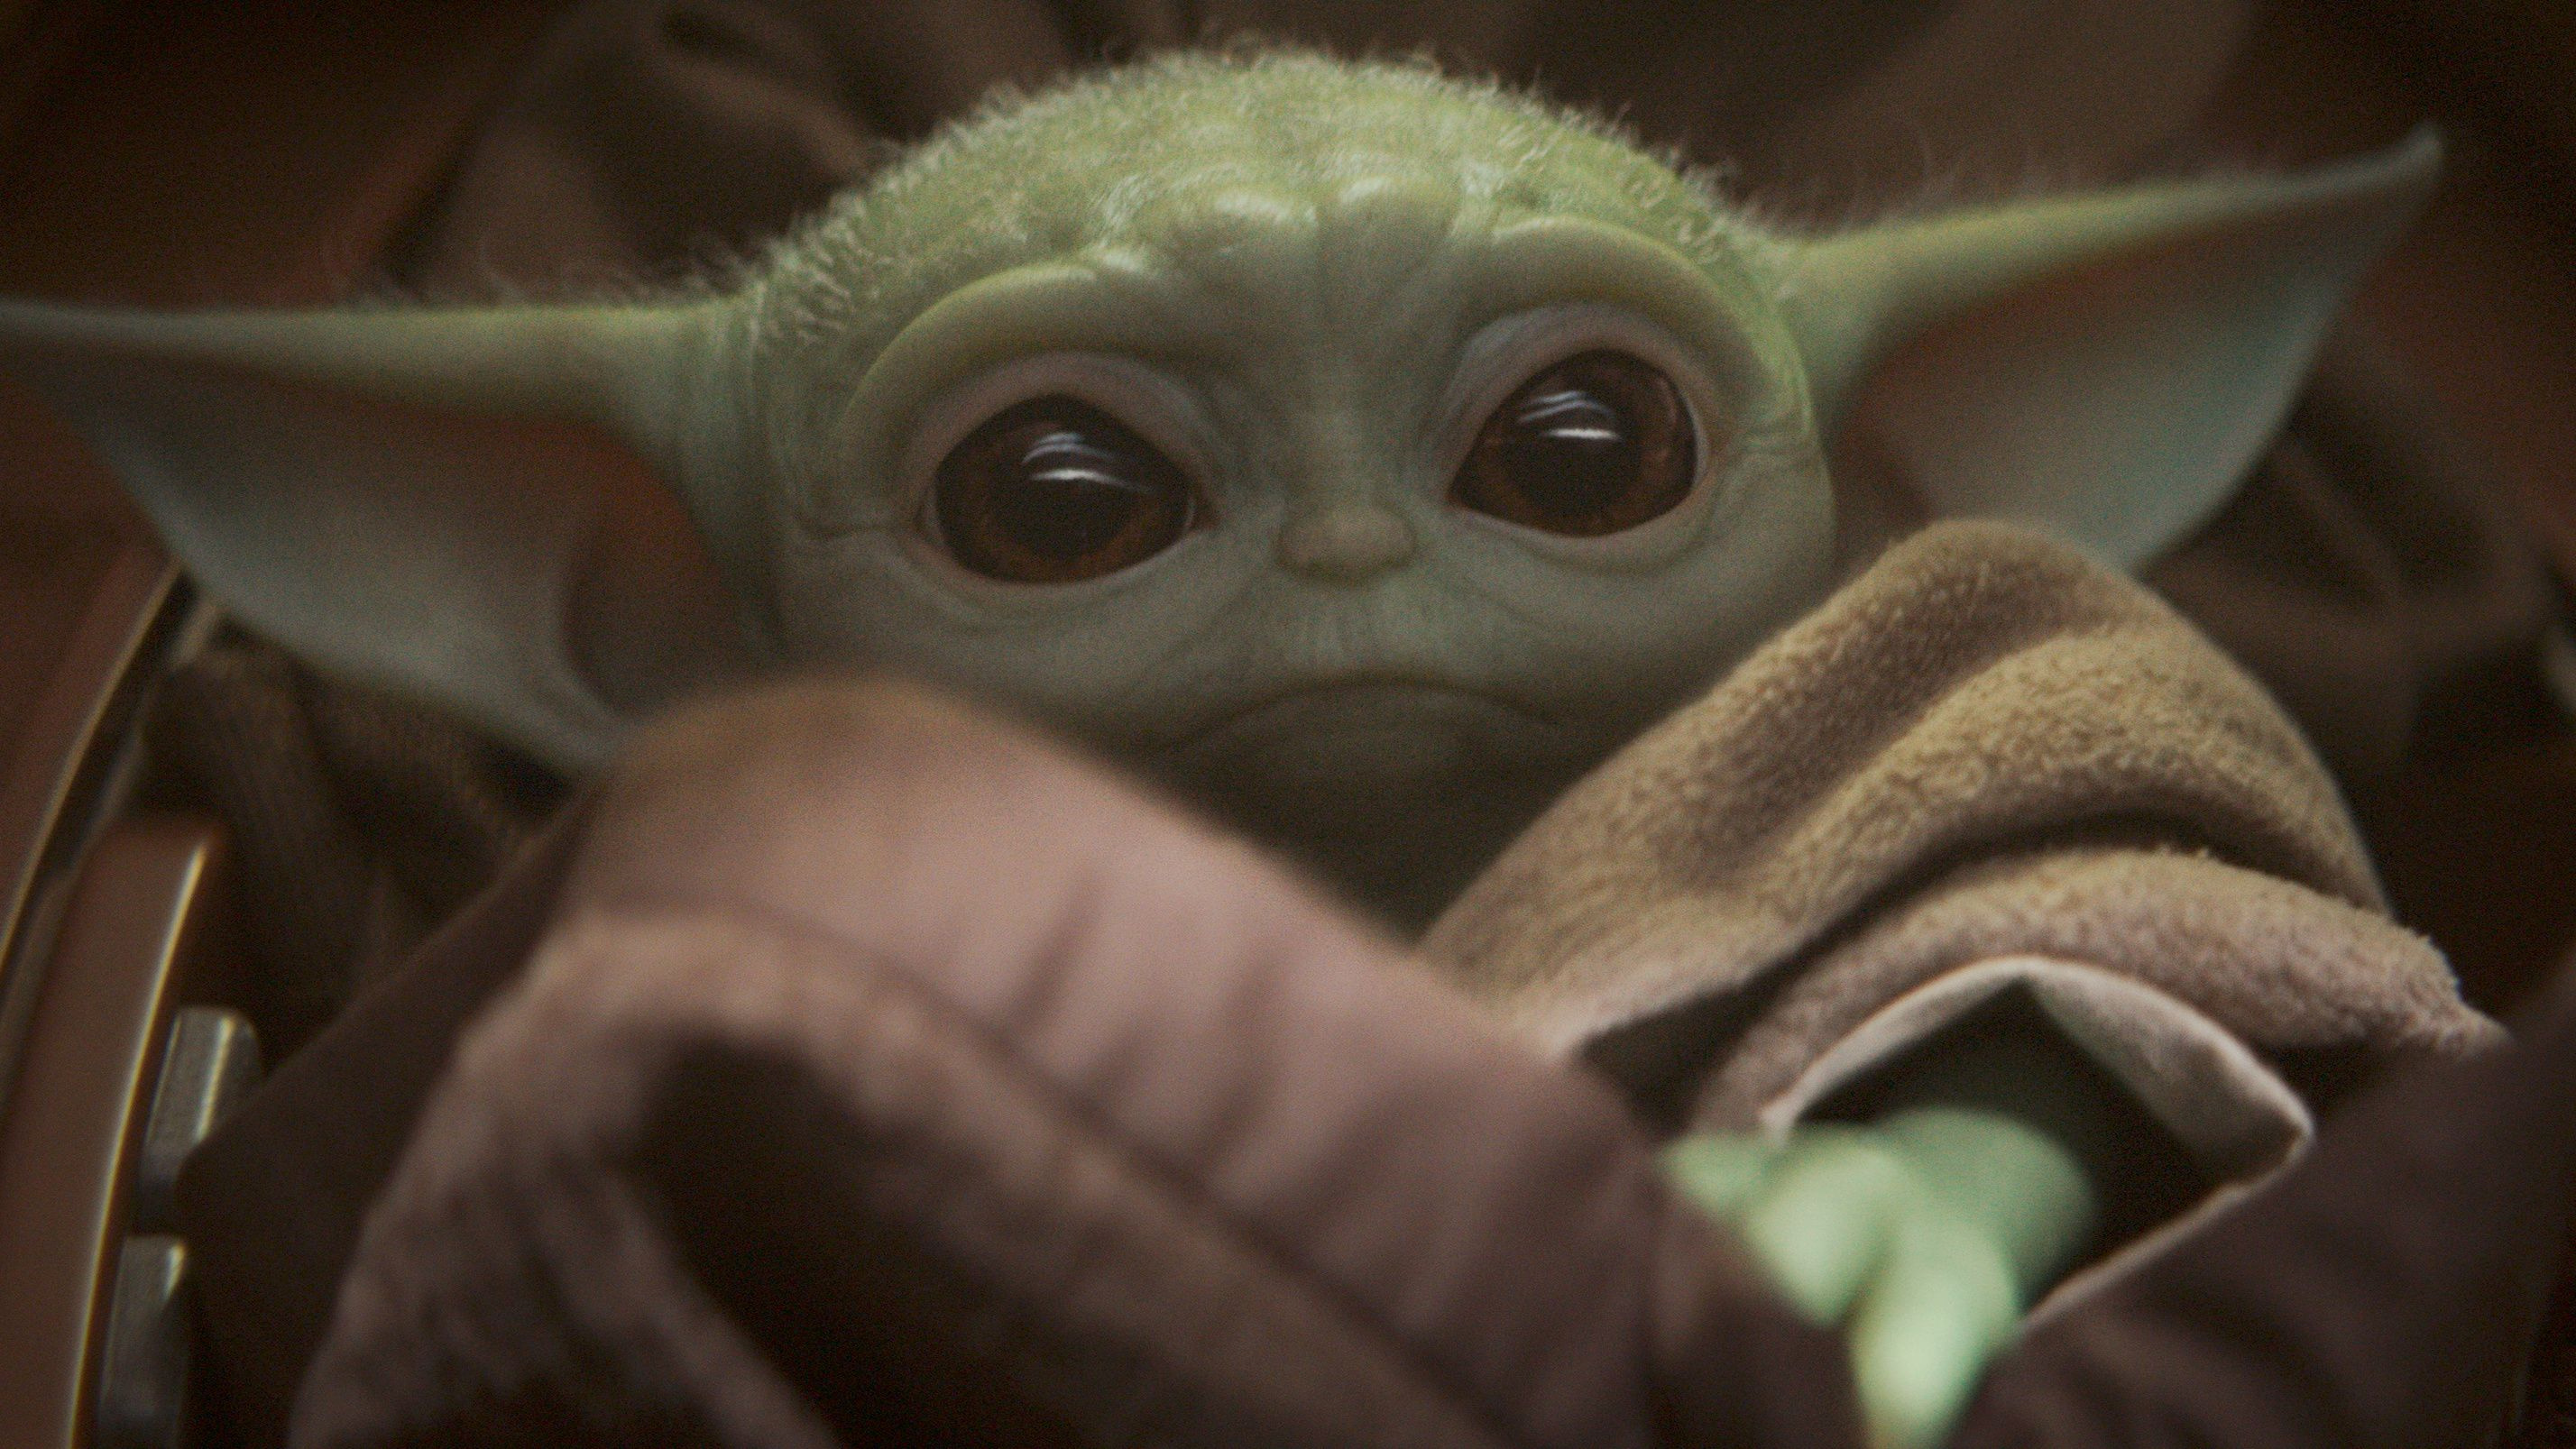 The Child, better known to audiences as "Baby Yoda", is seen in an undated still image from the Disney+ series "The Mandalorian" provided to Reuters February 5, 2020.   Disney+/Handout via REUTERS       NO RESALES. NO ARCHIVES. THIS IMAGE HAS BEEN SUPPLIED BY A THIRD PARTY.